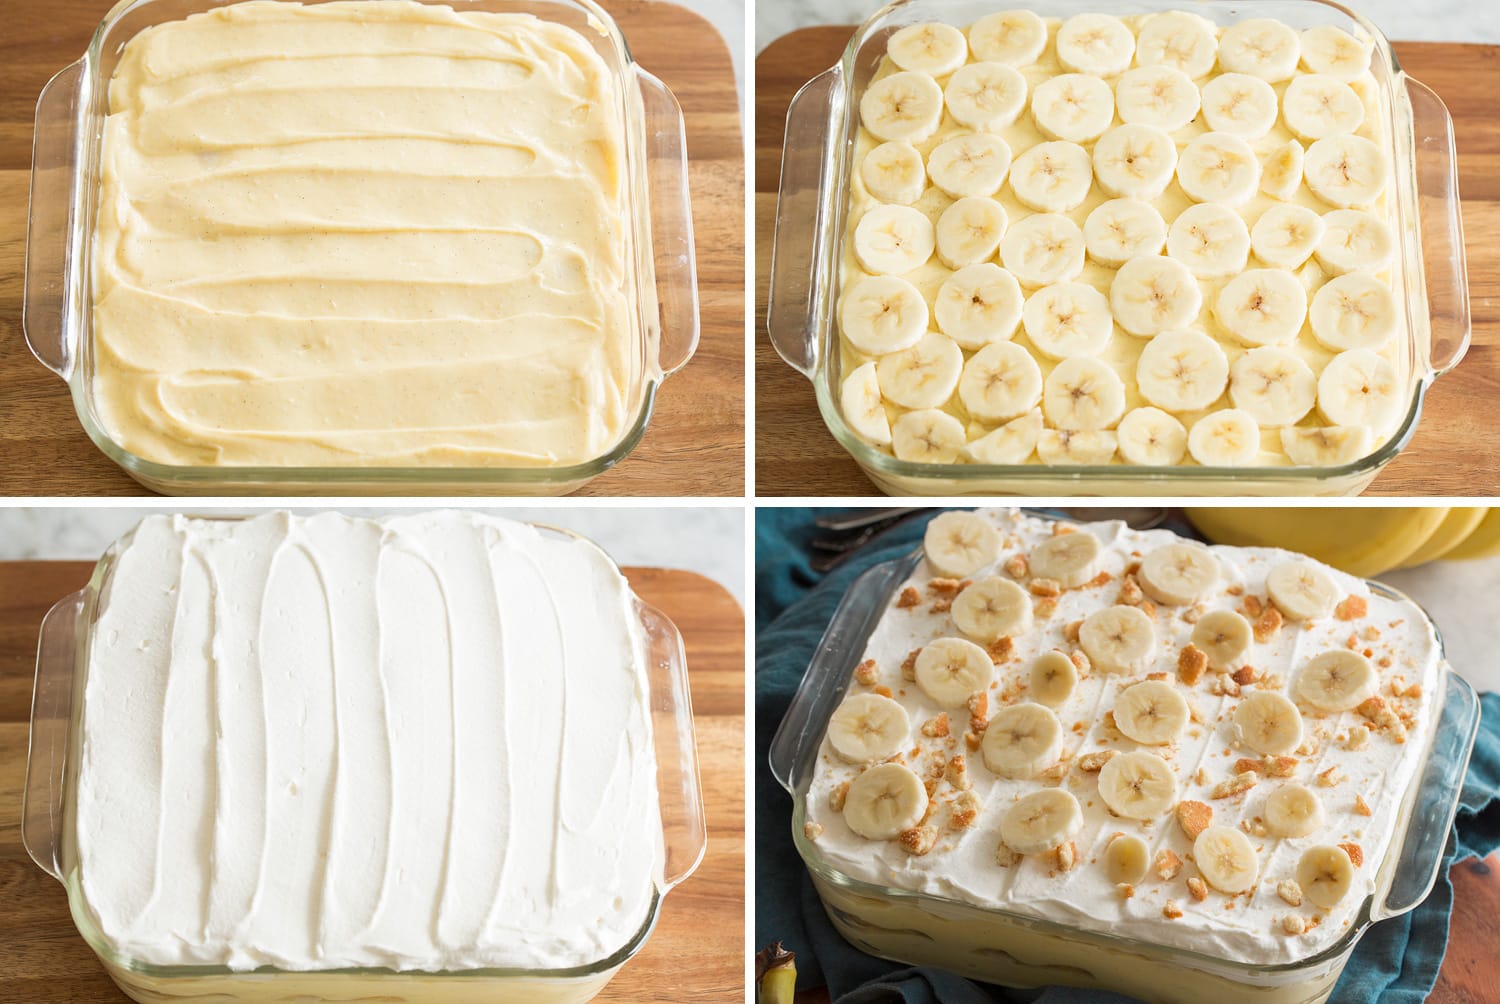 Continued steps showing layering of banana pudding in pan.